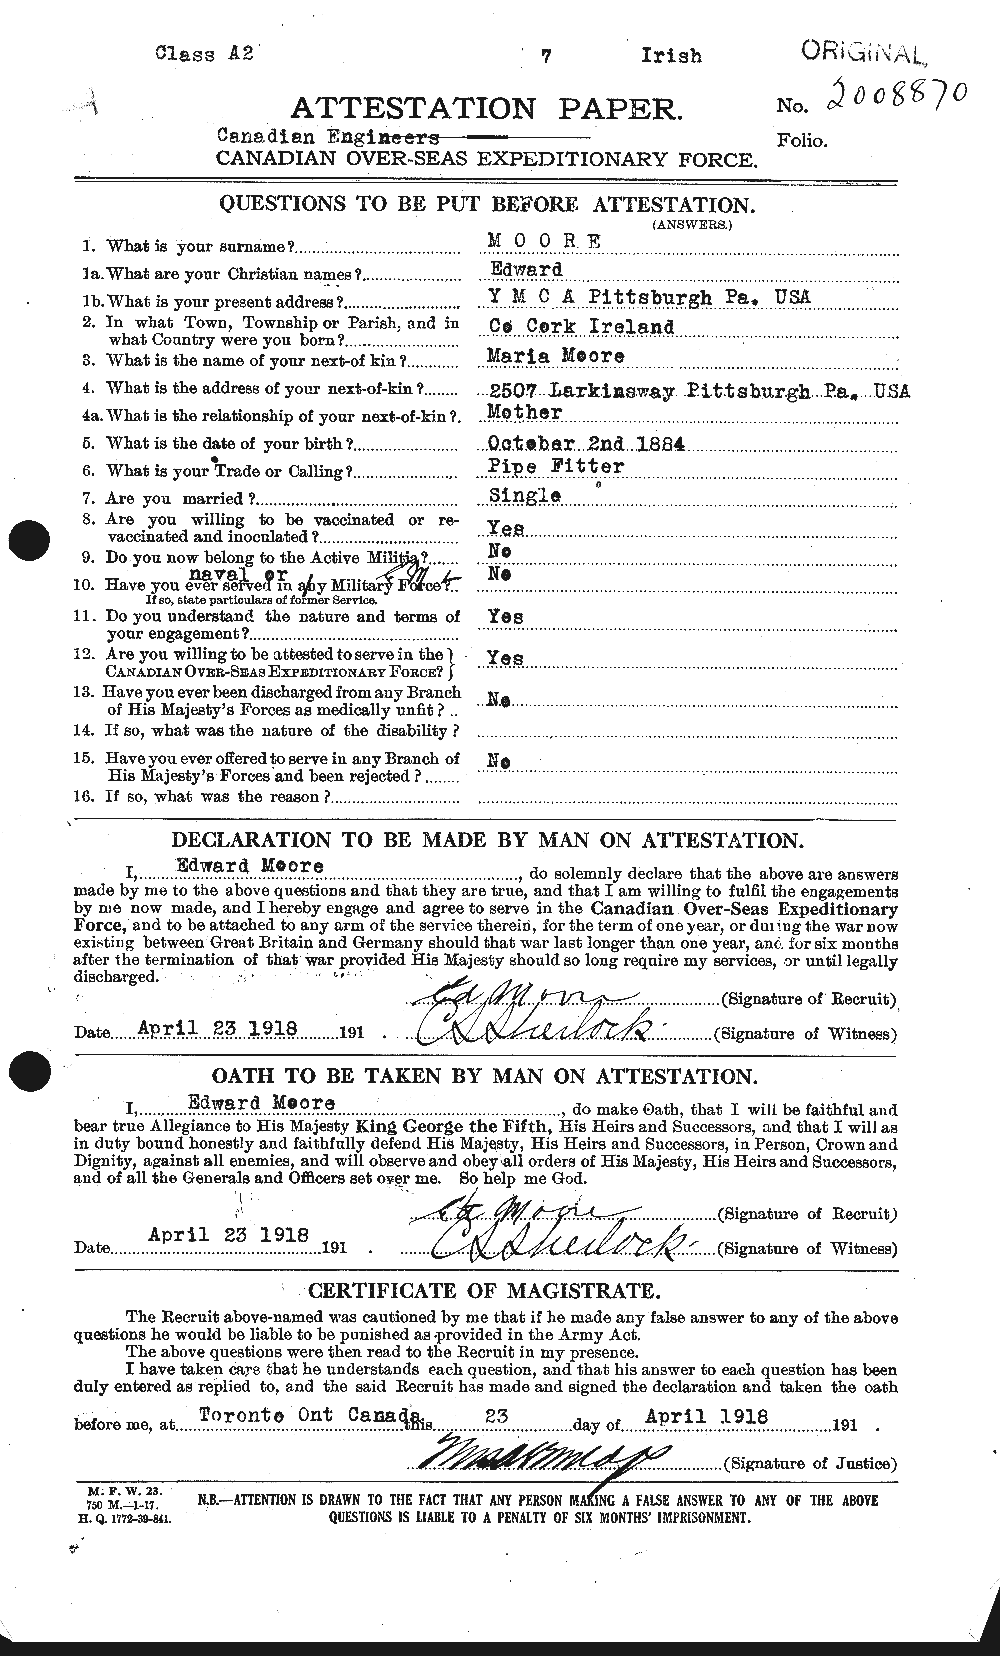 Personnel Records of the First World War - CEF 506616a